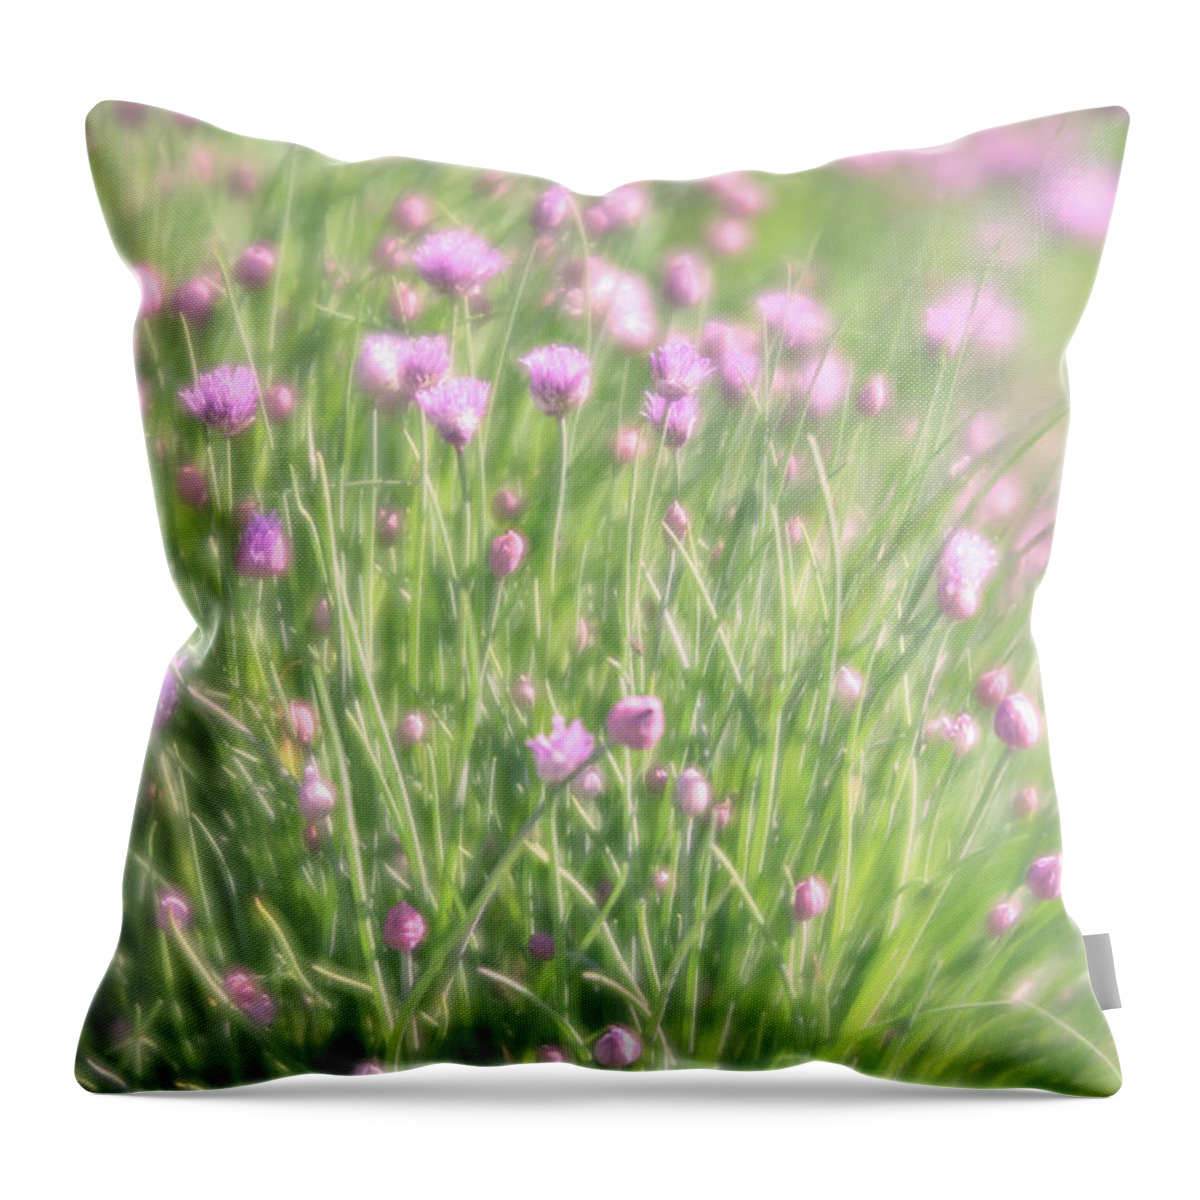 Chive Throw Pillow featuring the photograph Chives by Jennifer Grossnickle